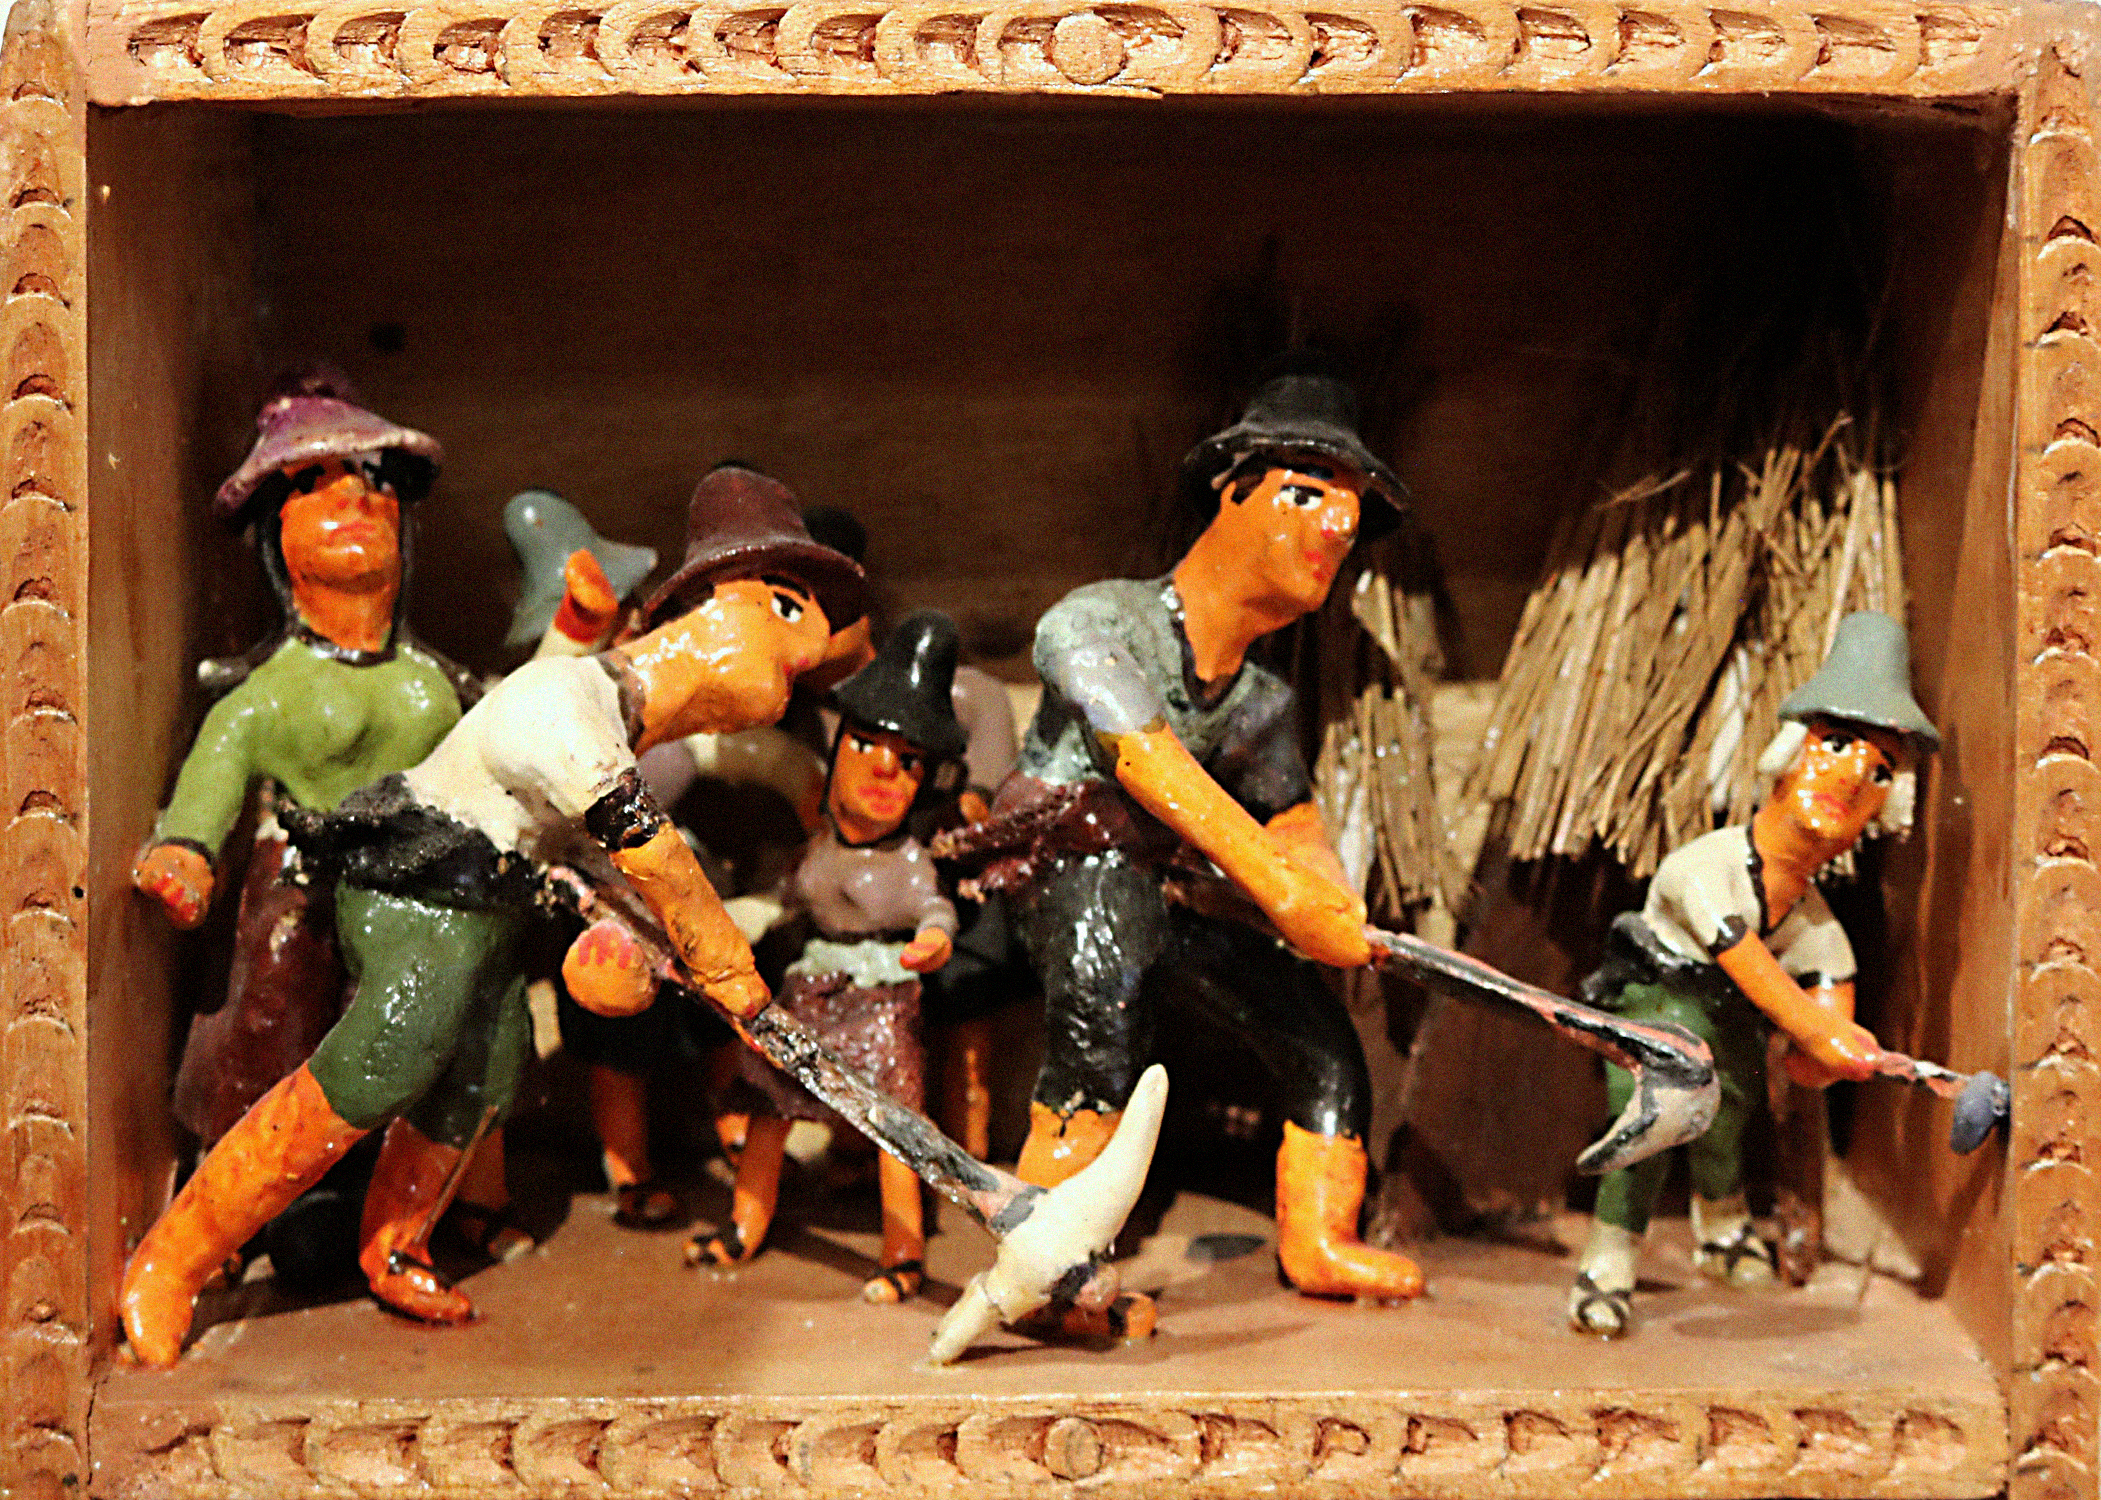 A scene called Sowing within a retablo. The scene portrays humanlike figurines wearing hats and holding farming tools, as though they are working in a field. In the backgroup are what appear to be structures with straw roofs.